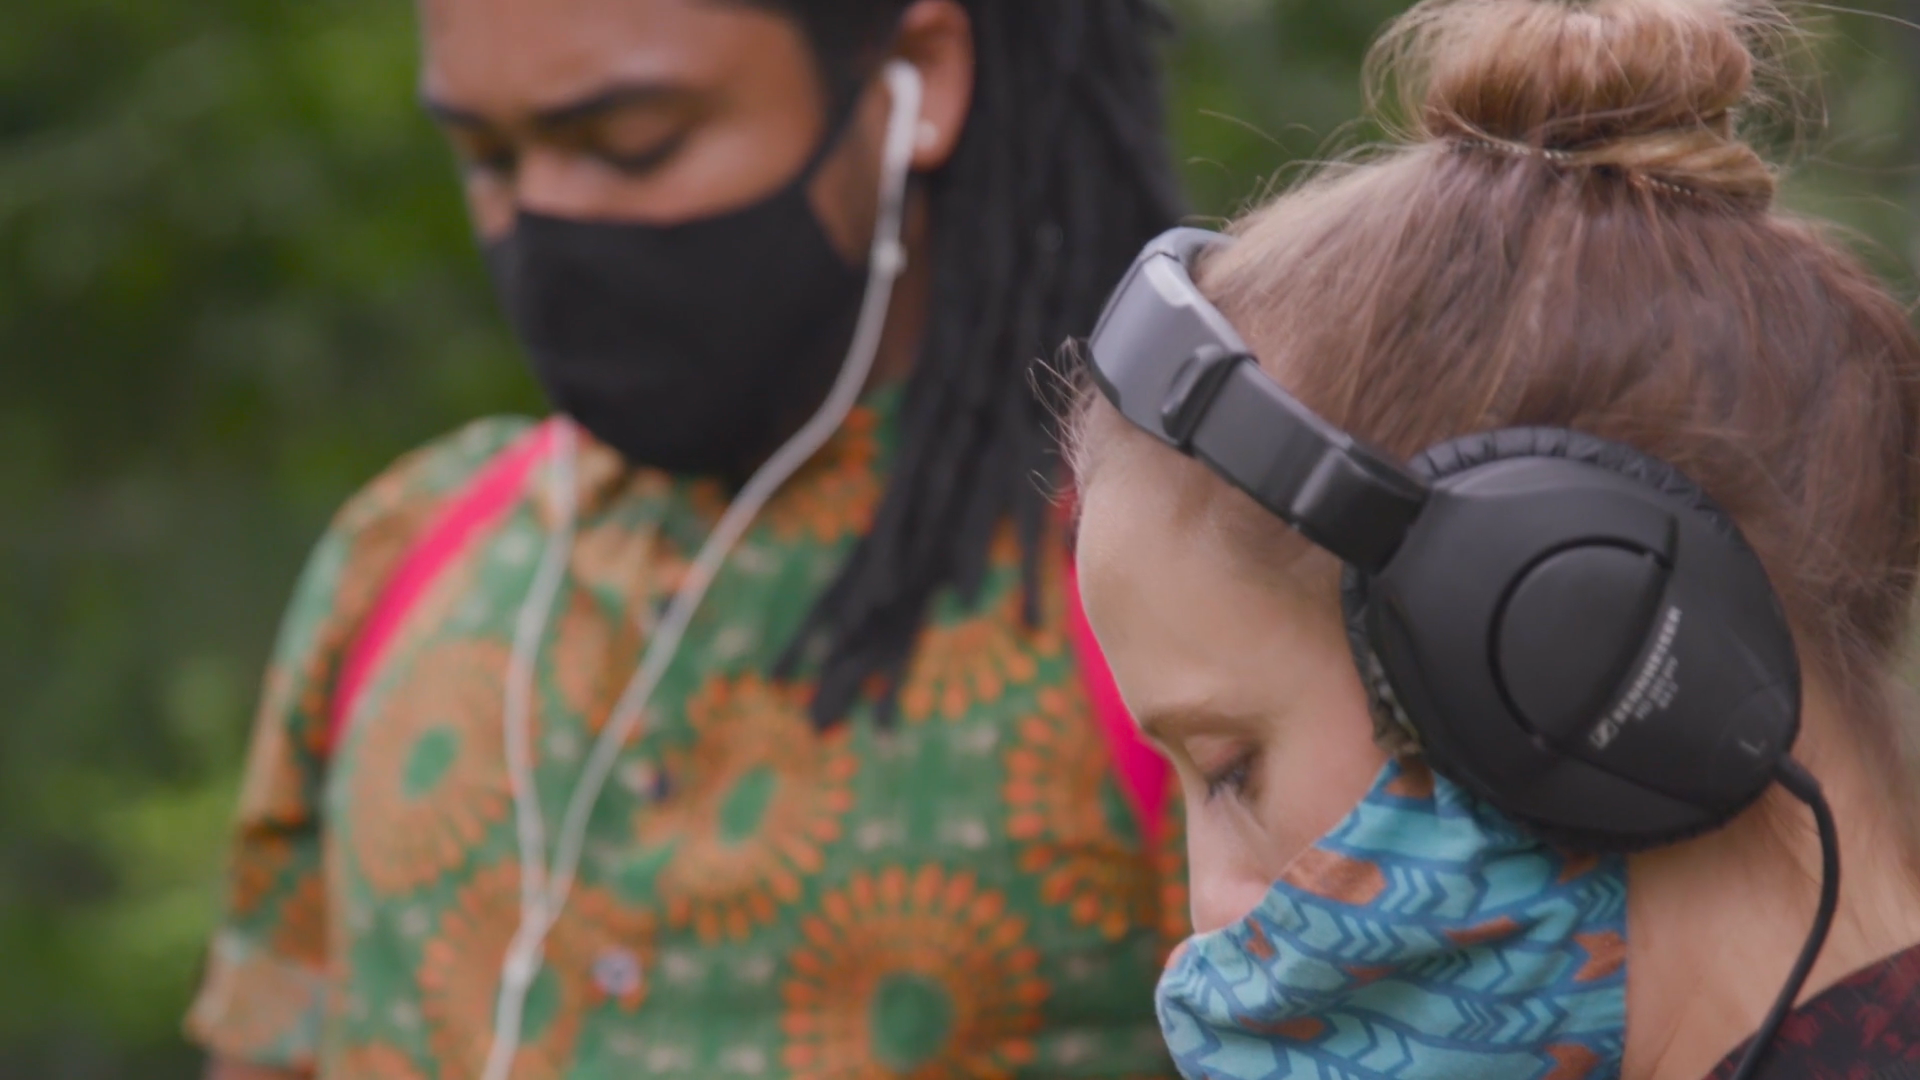 A man and a woman wearing headphones and face masks, listening to audio